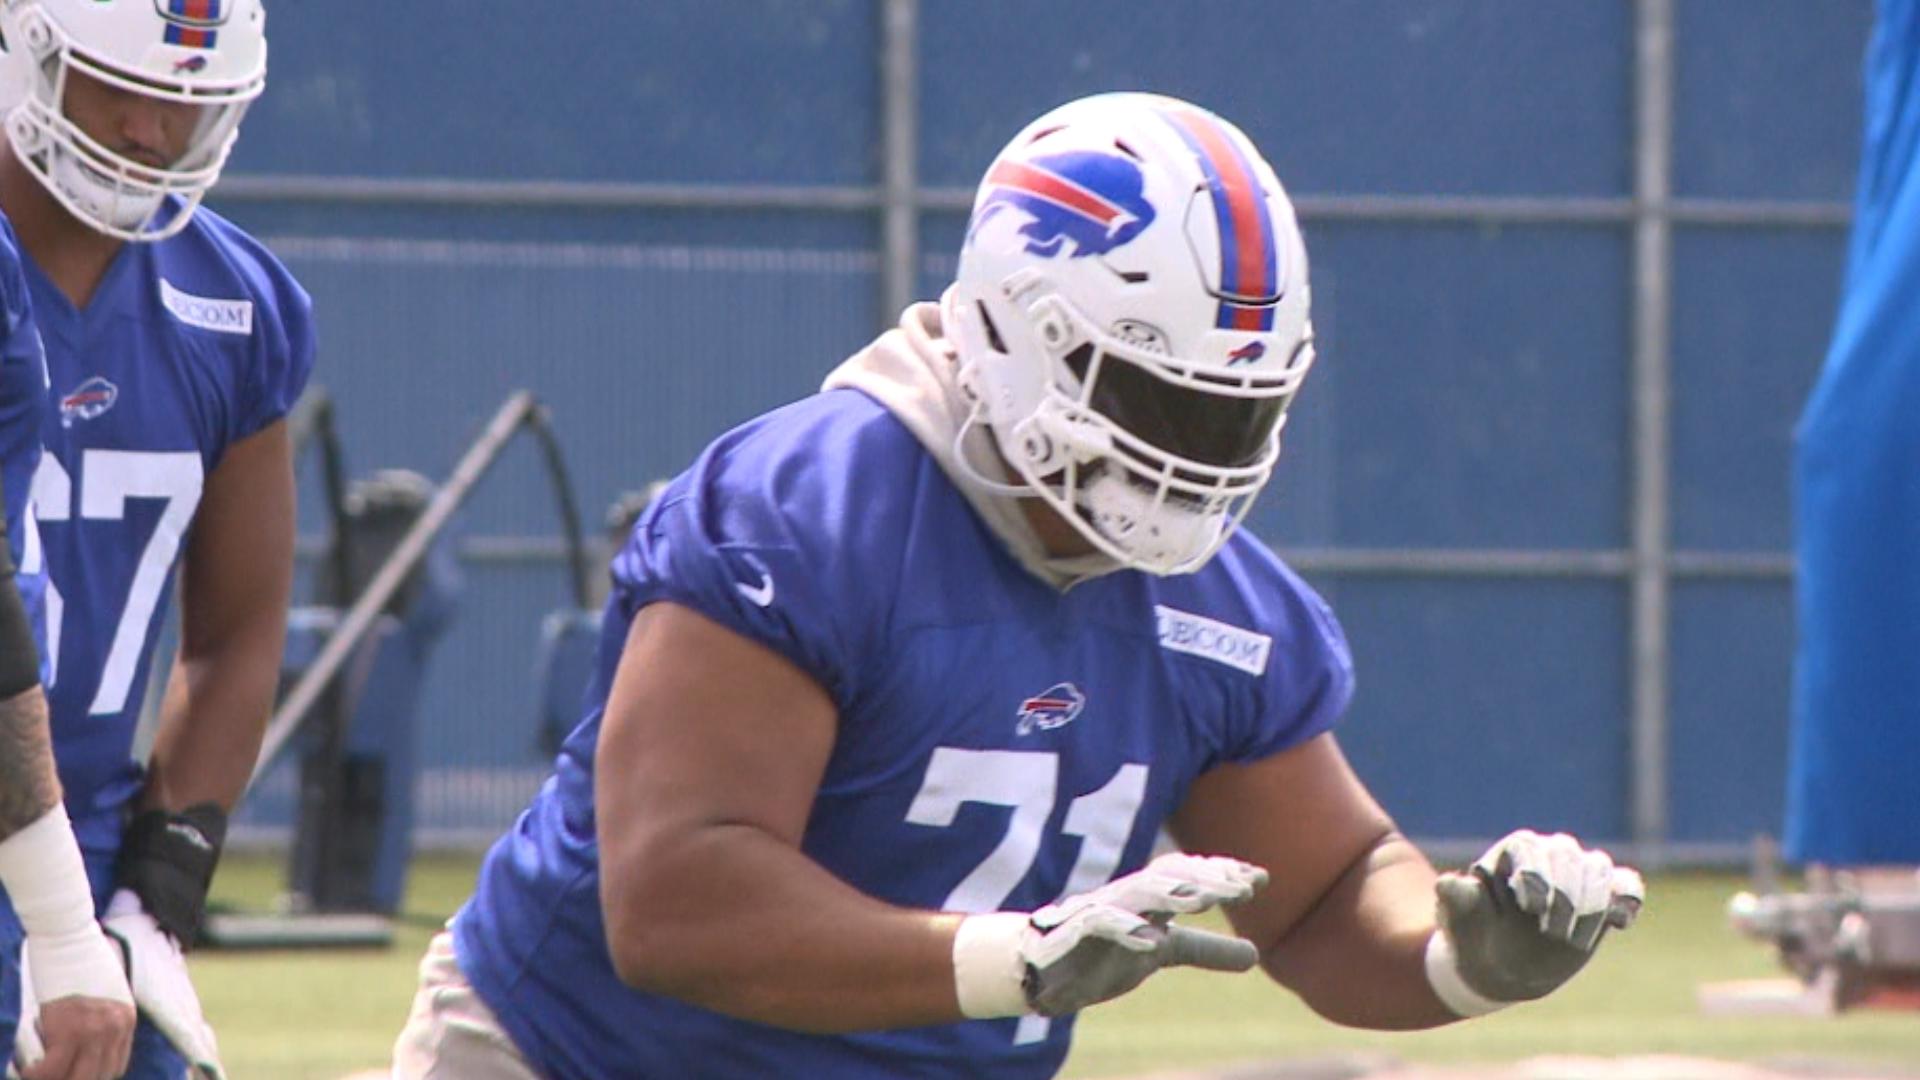 La'el Collins last played in an NFL game in December 2022. He's hoping what's been a challenging recovery ends with him seeing the field again, this time in Buffalo.